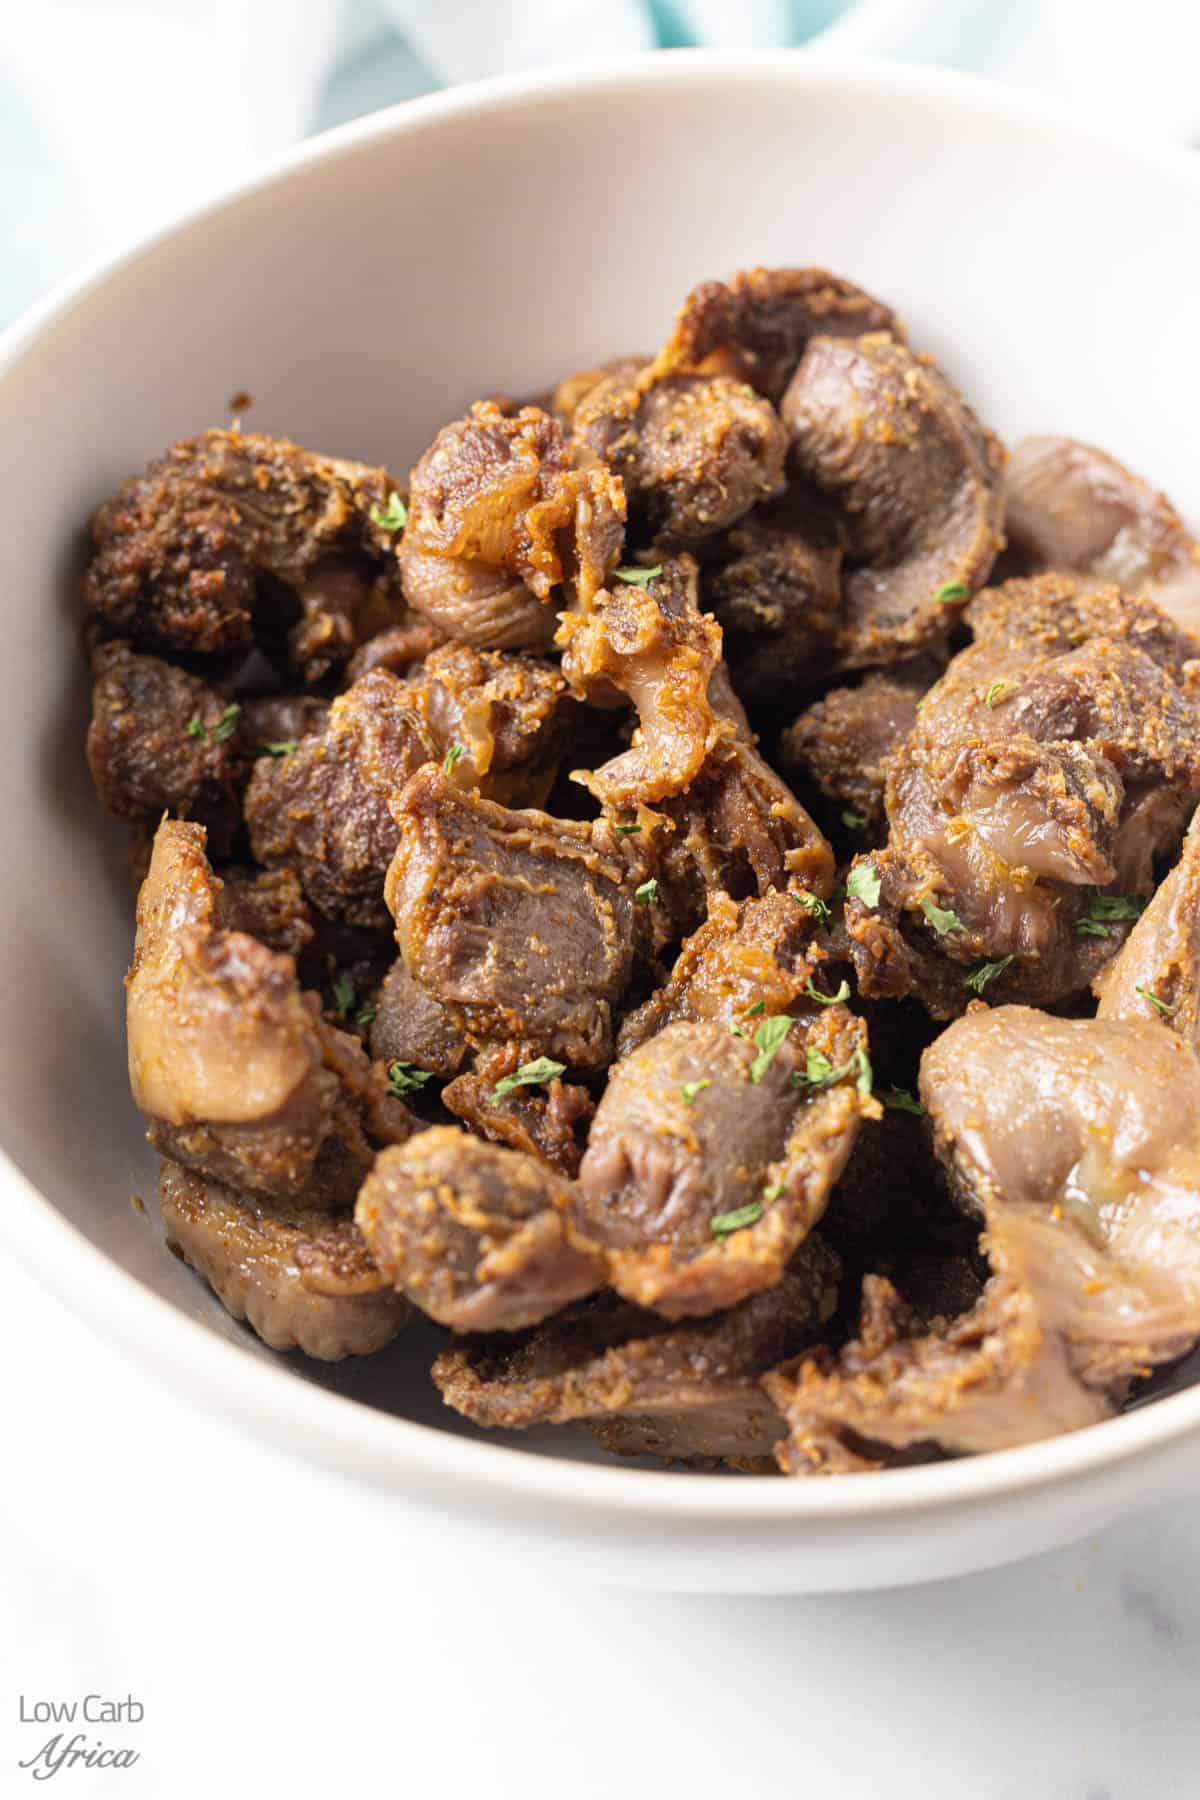 Crispy air fryer chicken gizzards are ready to eat.